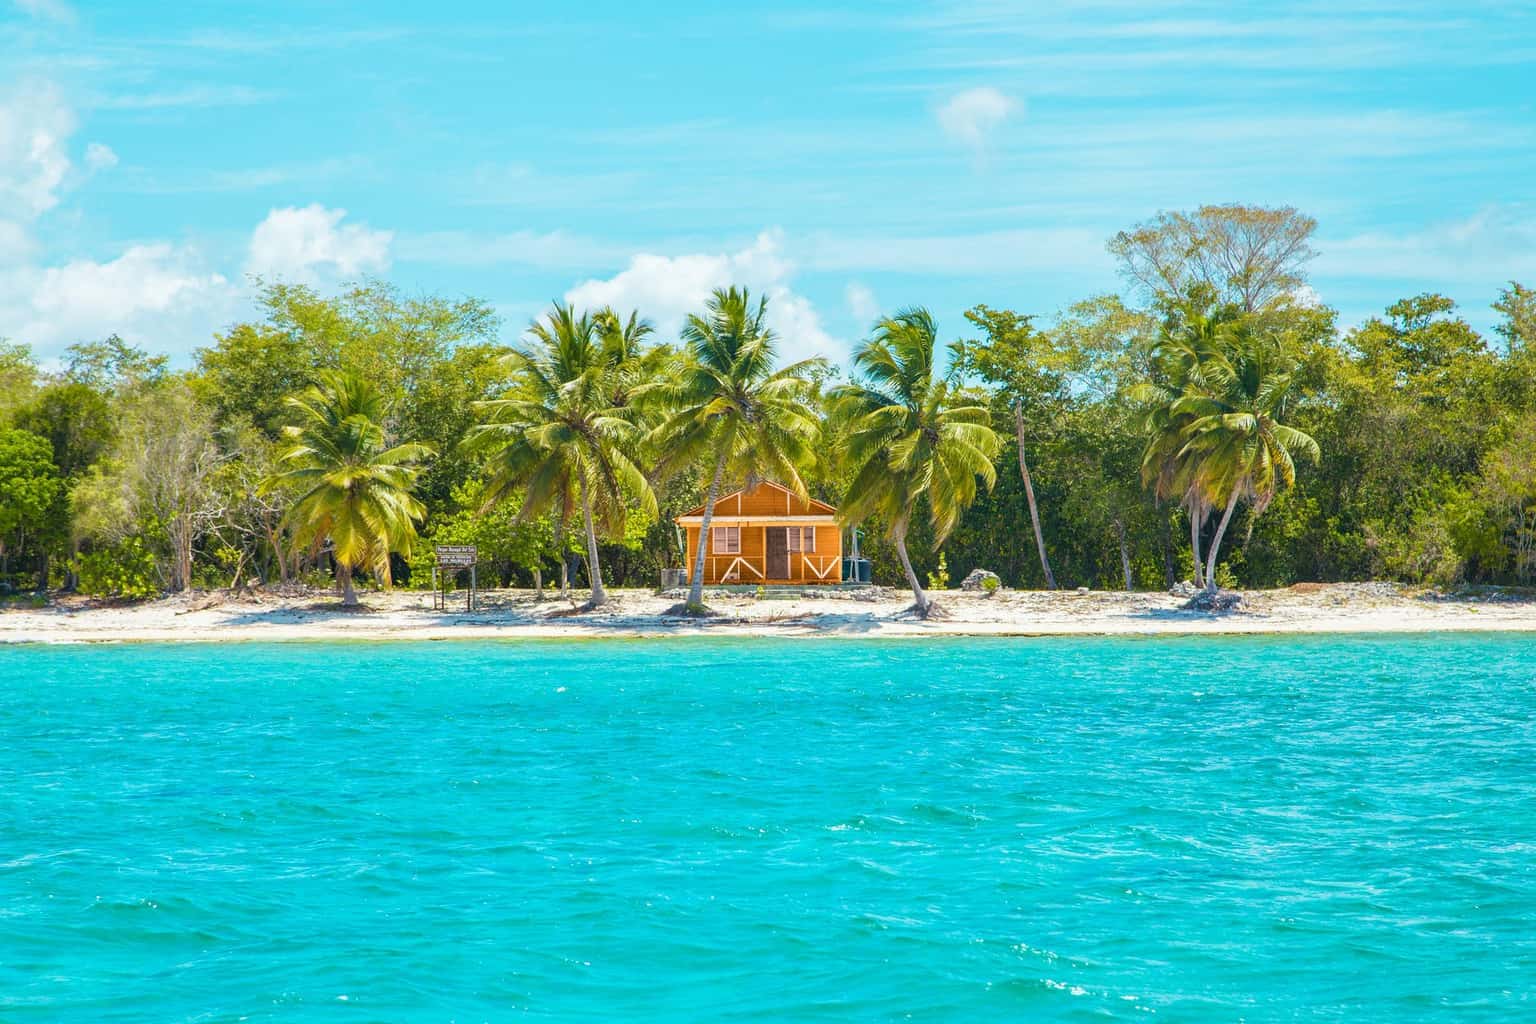 photo of wooden cabin on beach near coconut trees